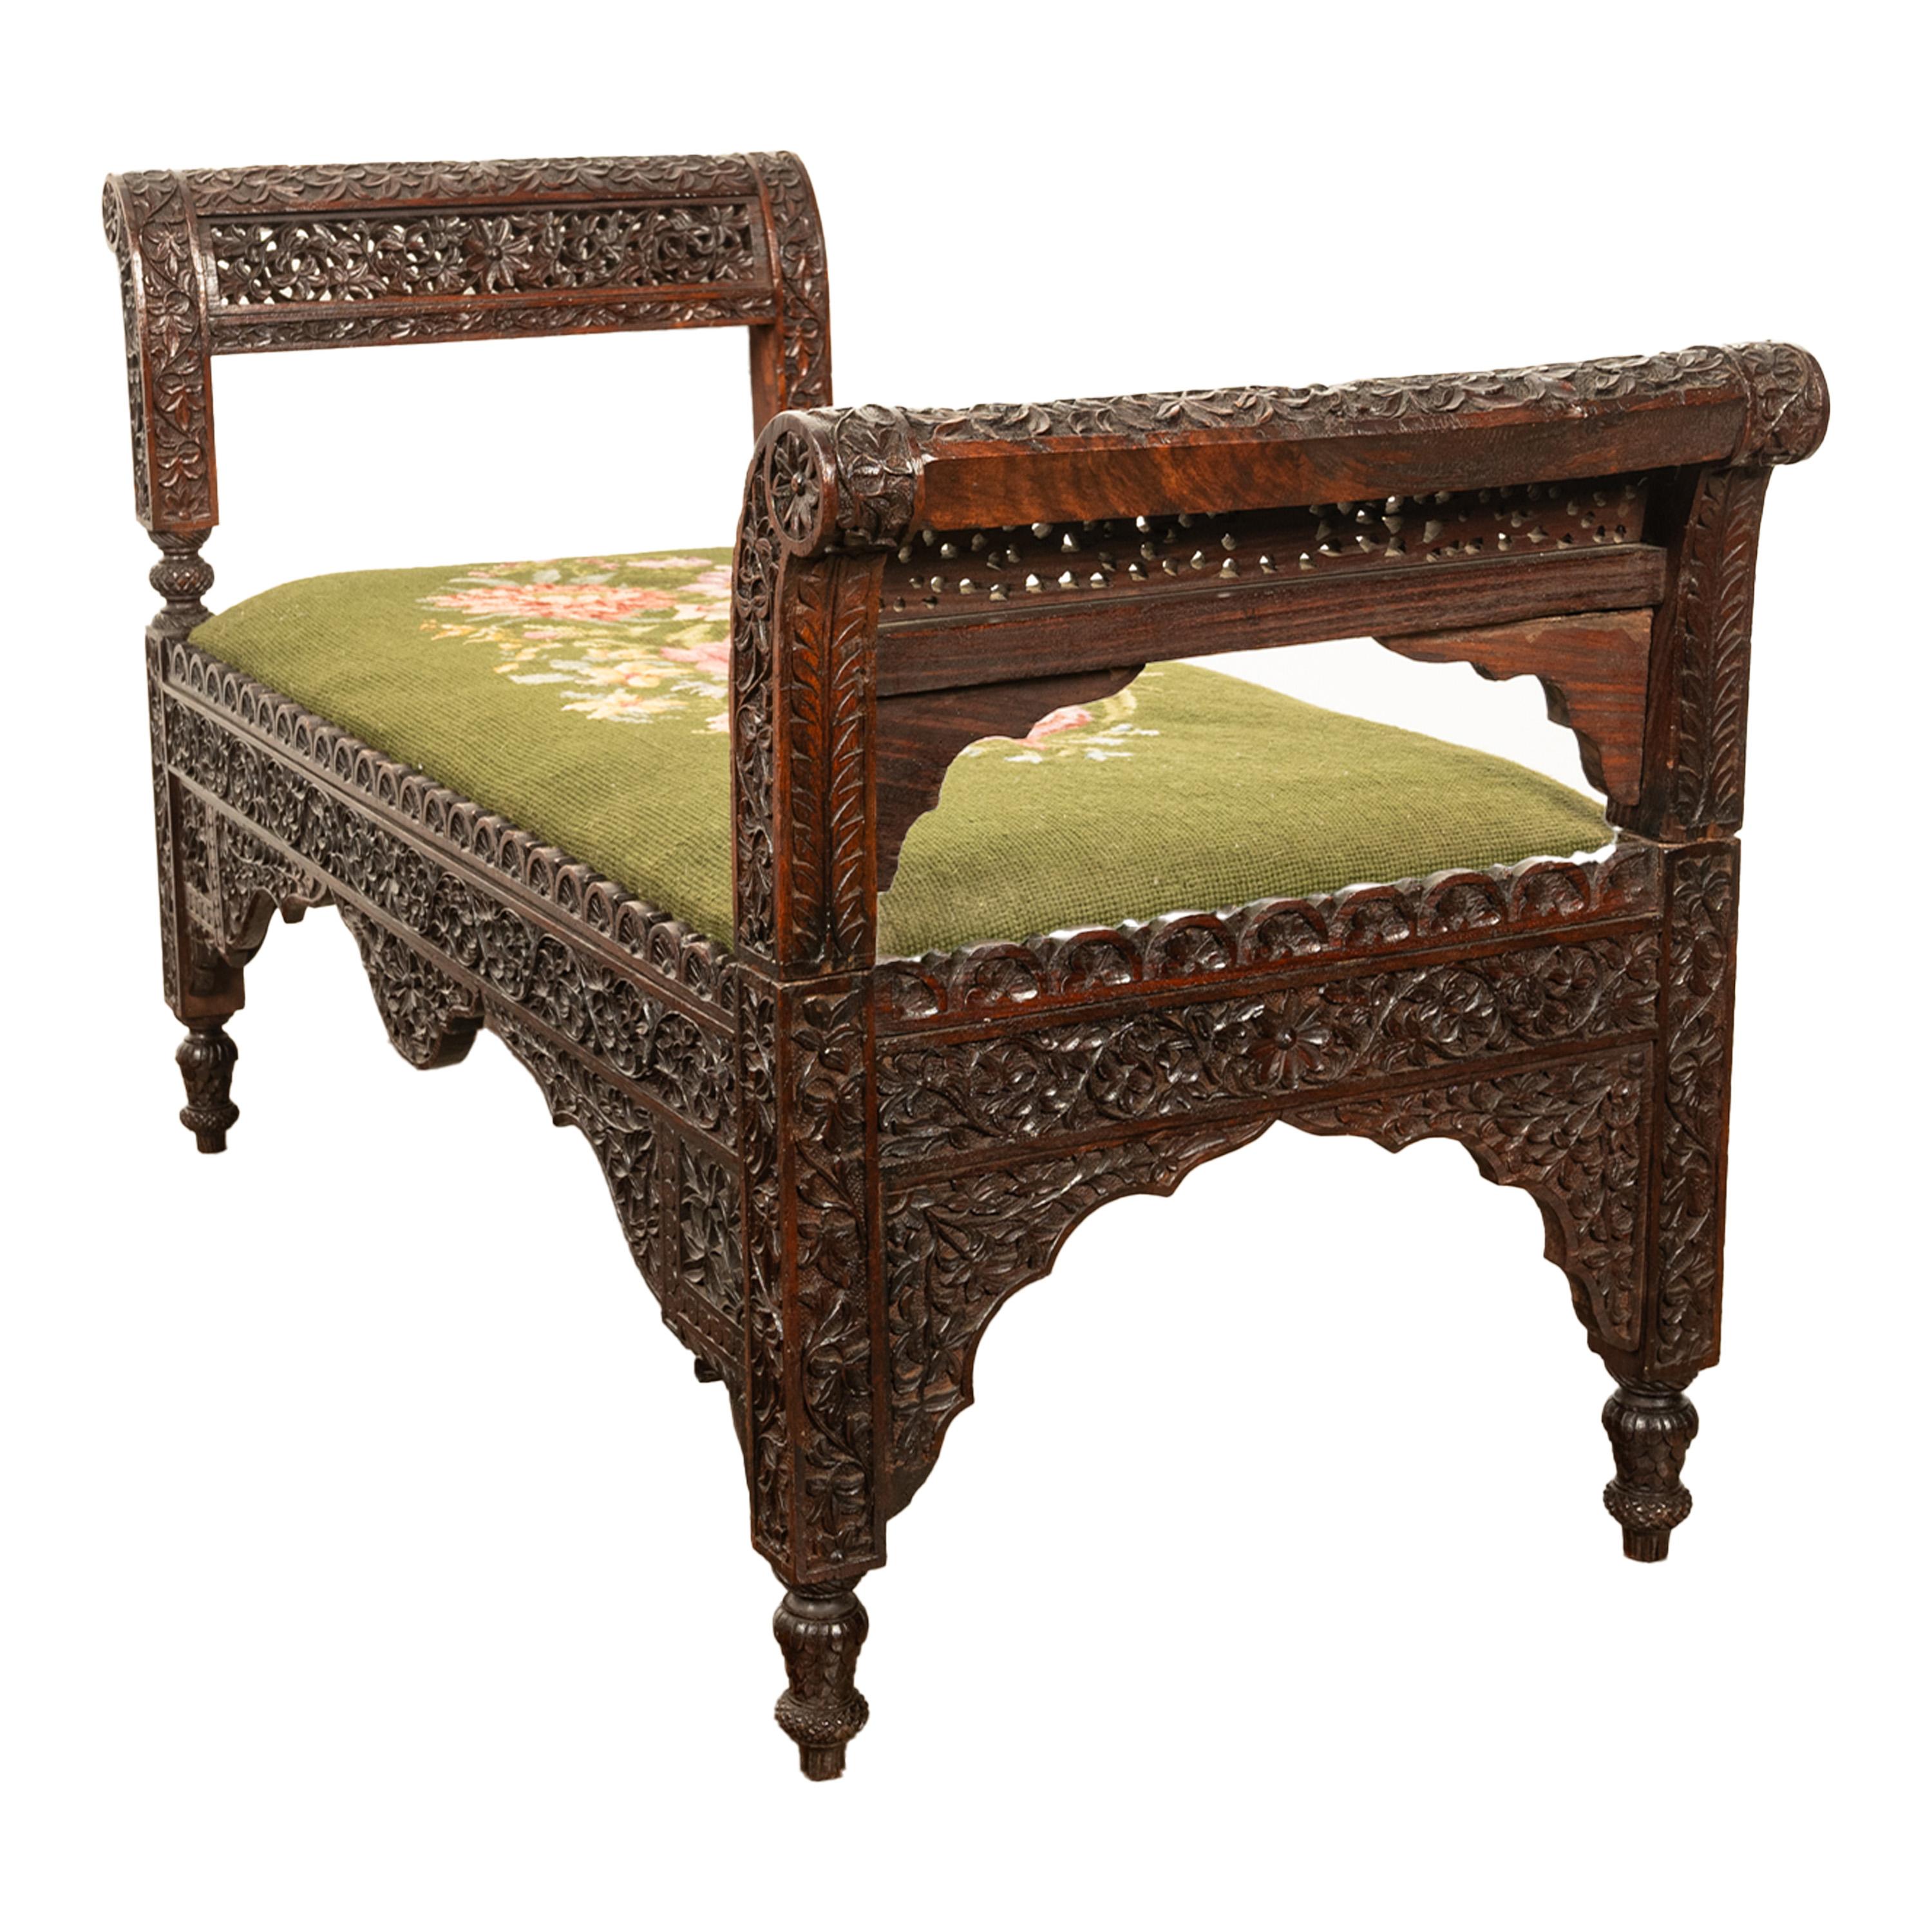 Mid-19th Century Antique Colonial Anglo Indian Carved Rosewood Window Seat Bench Needlepoint 1860 For Sale